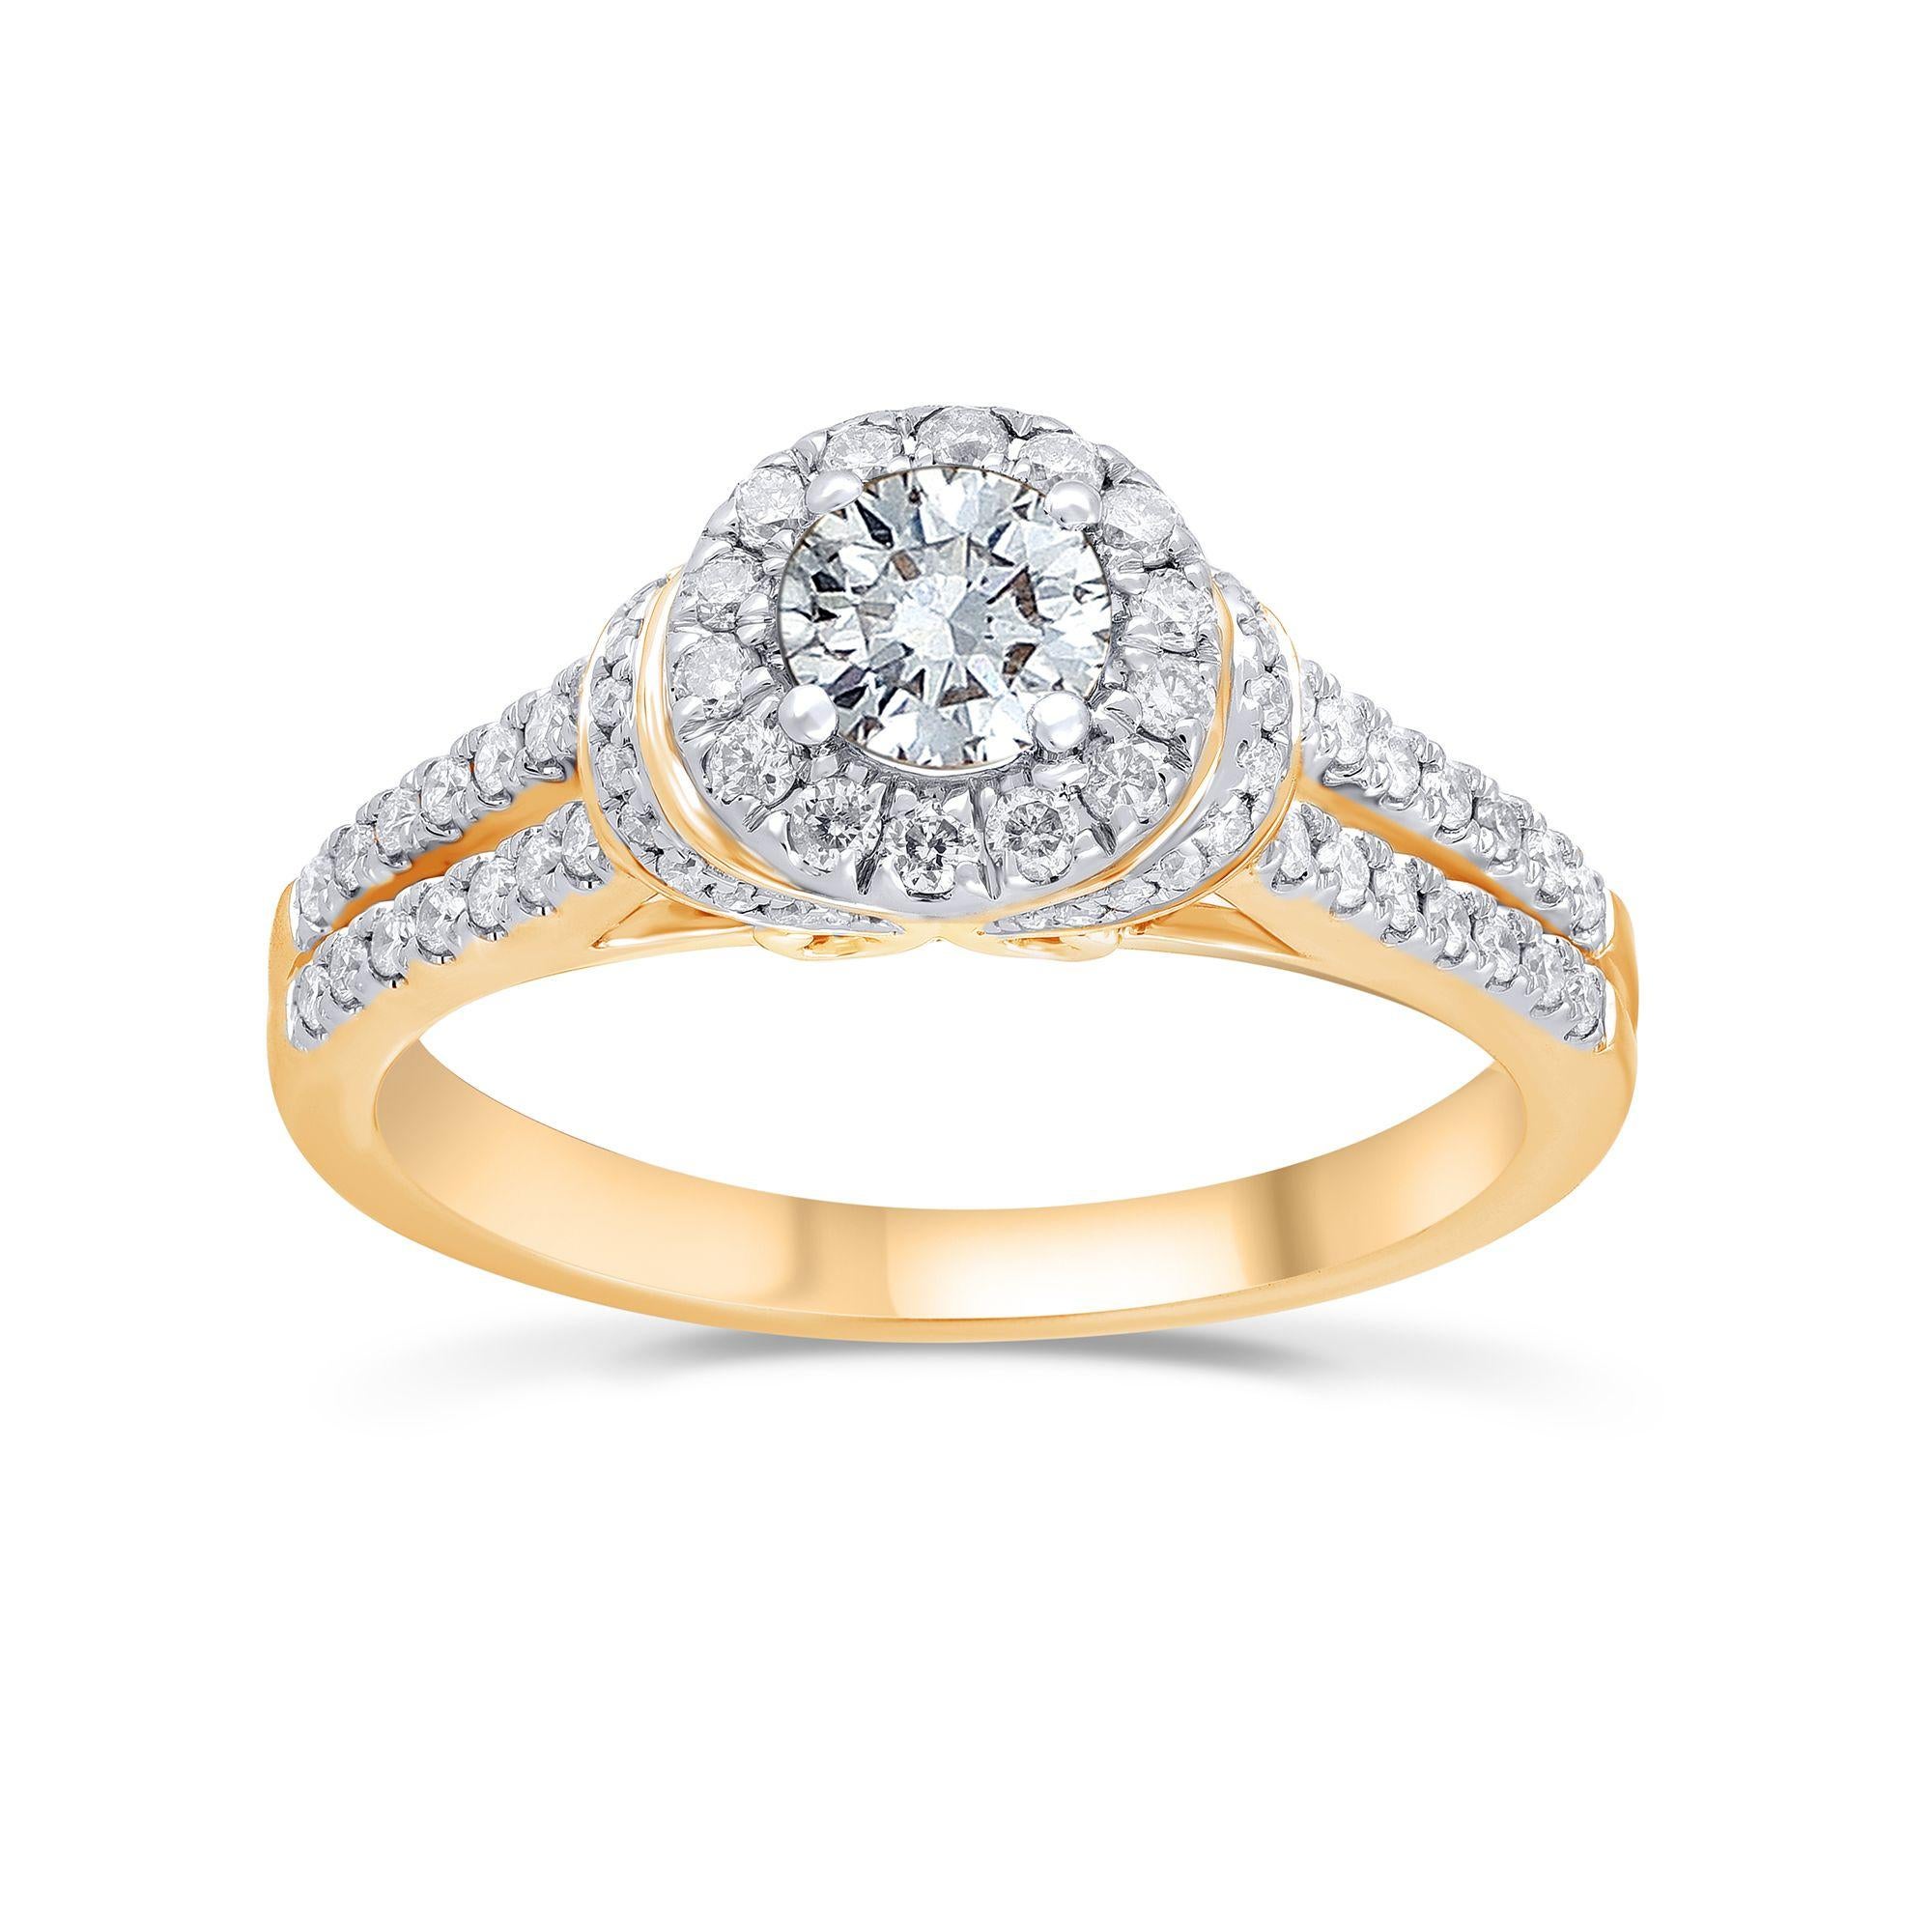 Delightful Rose Gold Diamond Bridal Ring studded with 65 diamonds in prong and pave setting, crafted in 14KT gold. Diamonds are graded H-I Color, I1-I2 Clarity. Ring size is US size 7.25 and complimentary resizing is available. 
